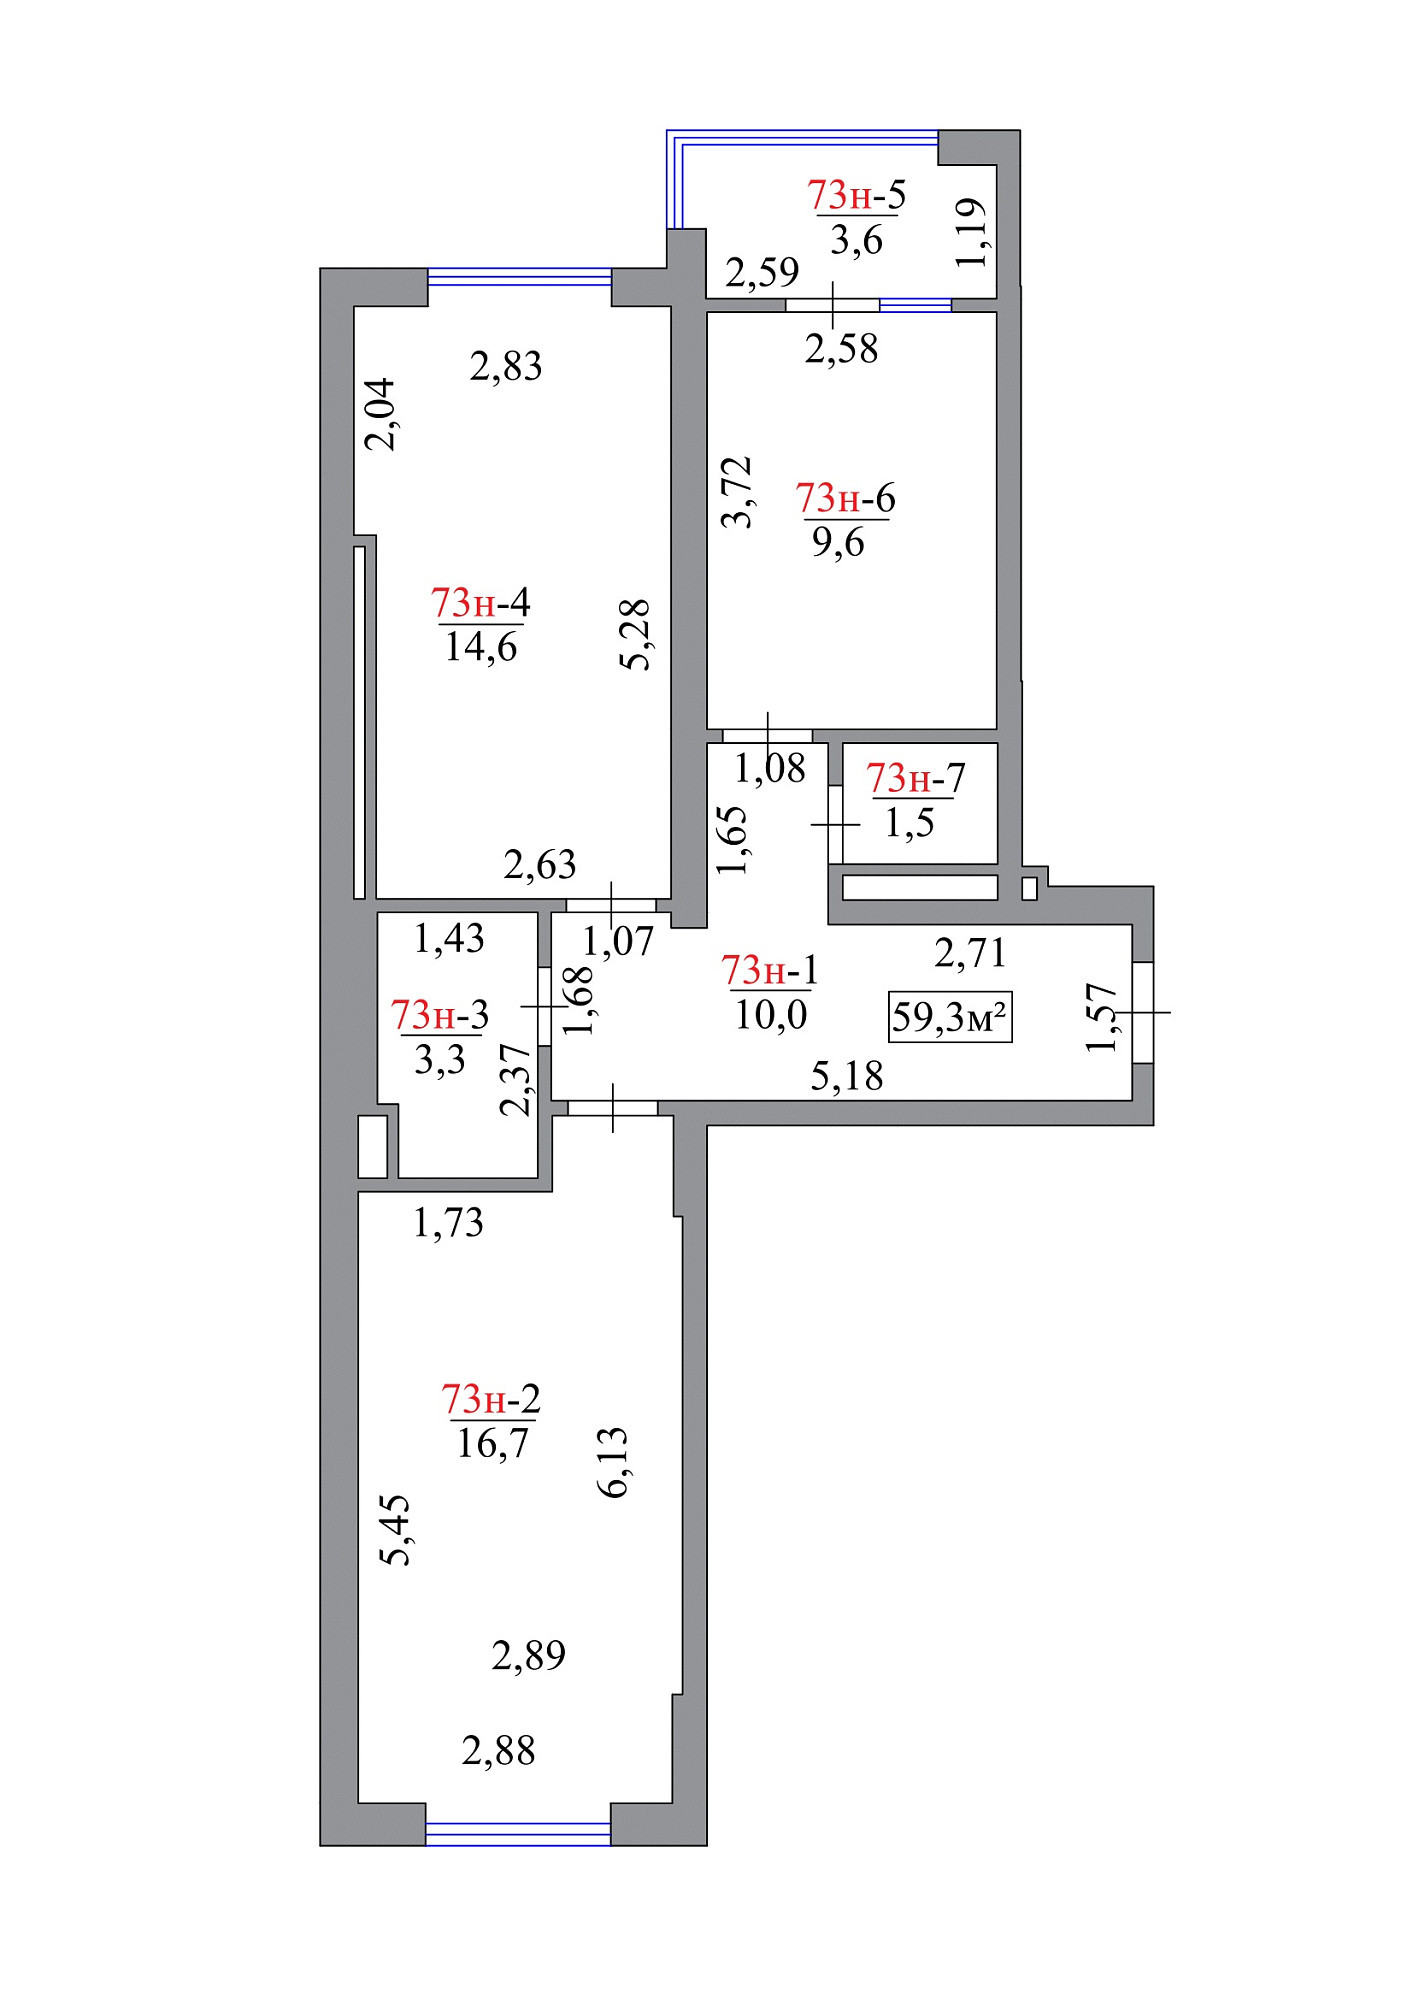 Planning 2-rm flats area 59.3m2, AB-07-08/00066.